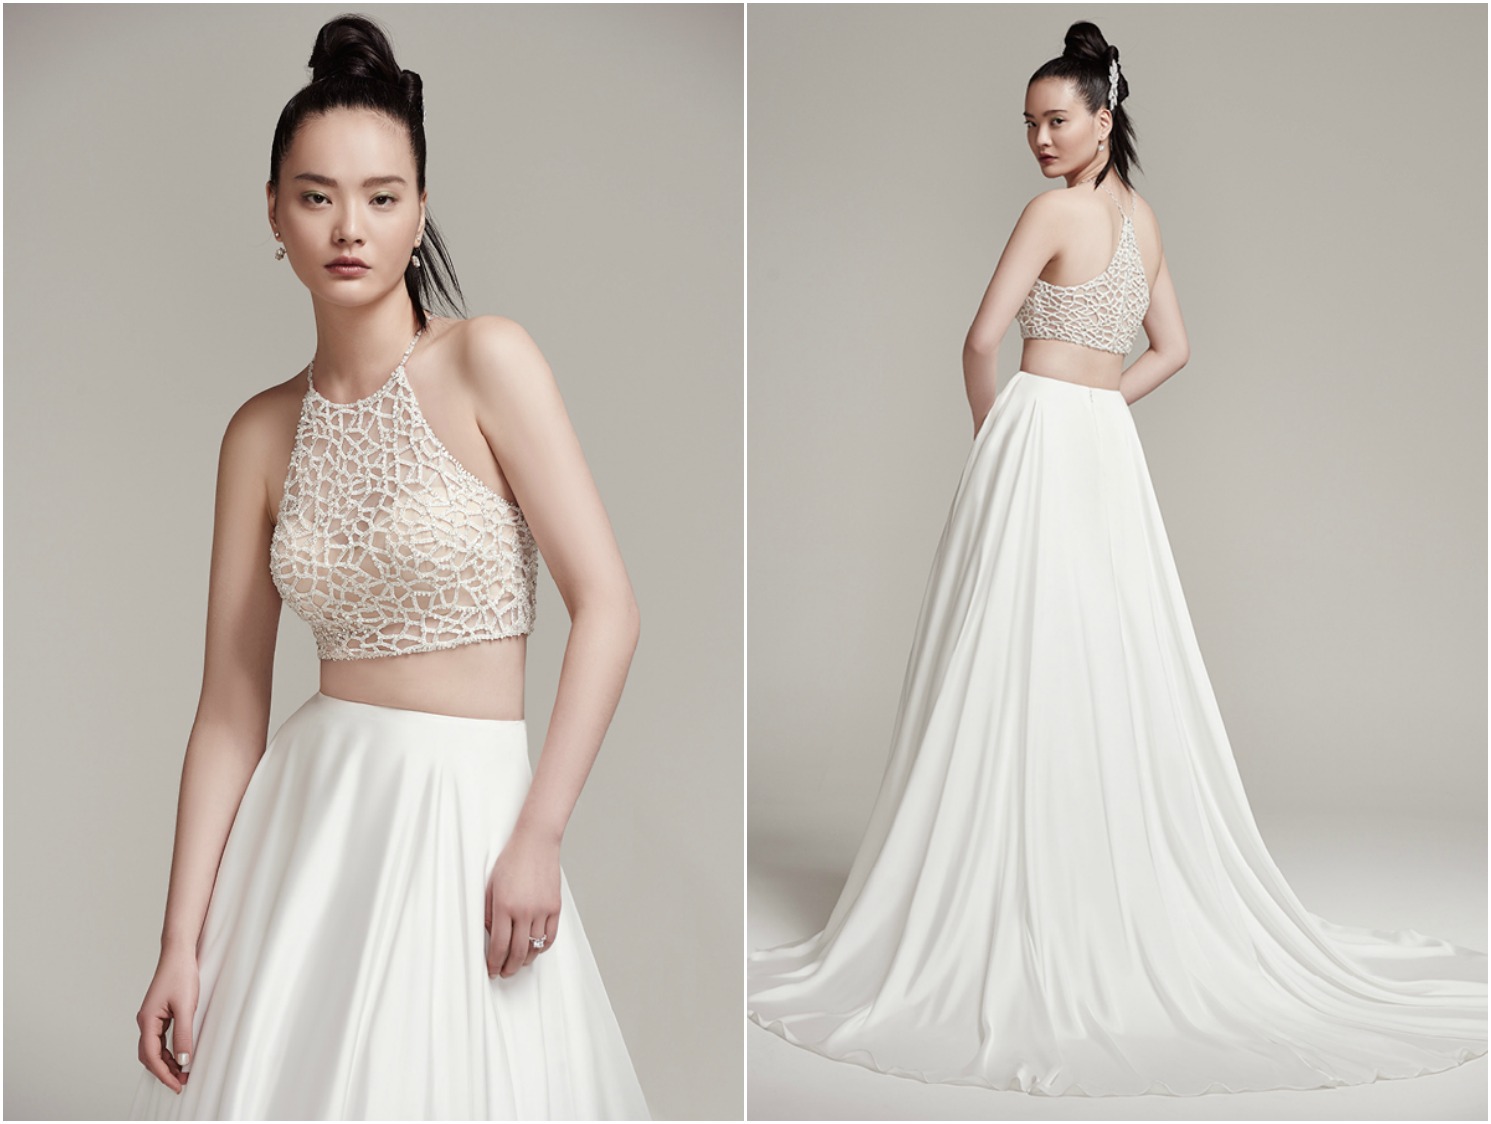 Sophisticated bead encrusted cropped halter with crystal button closure and bandeau lining. Inessa satin A-line skirt with zipper closure.

<a href="https://www.maggiesottero.com/sottero-and-midgley/jude-aviana/9966" target="_blank">Sottero &amp; Midgley</a>